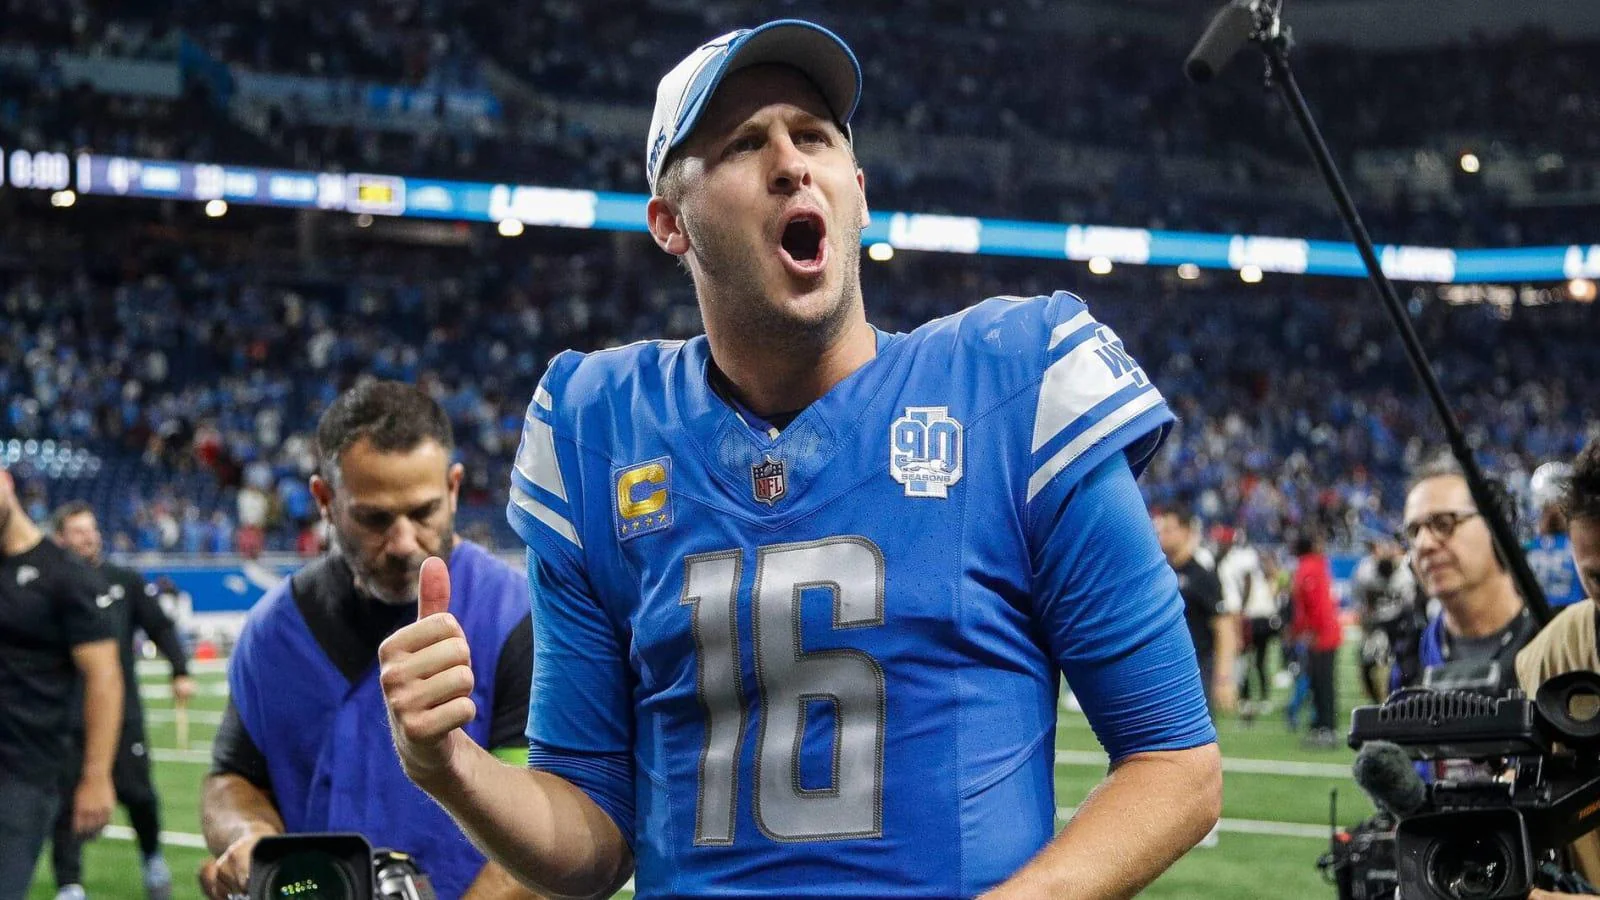 Jared Goff's Journey: How the Detroit Lions' QB Went from Trade Bust to Team Hero